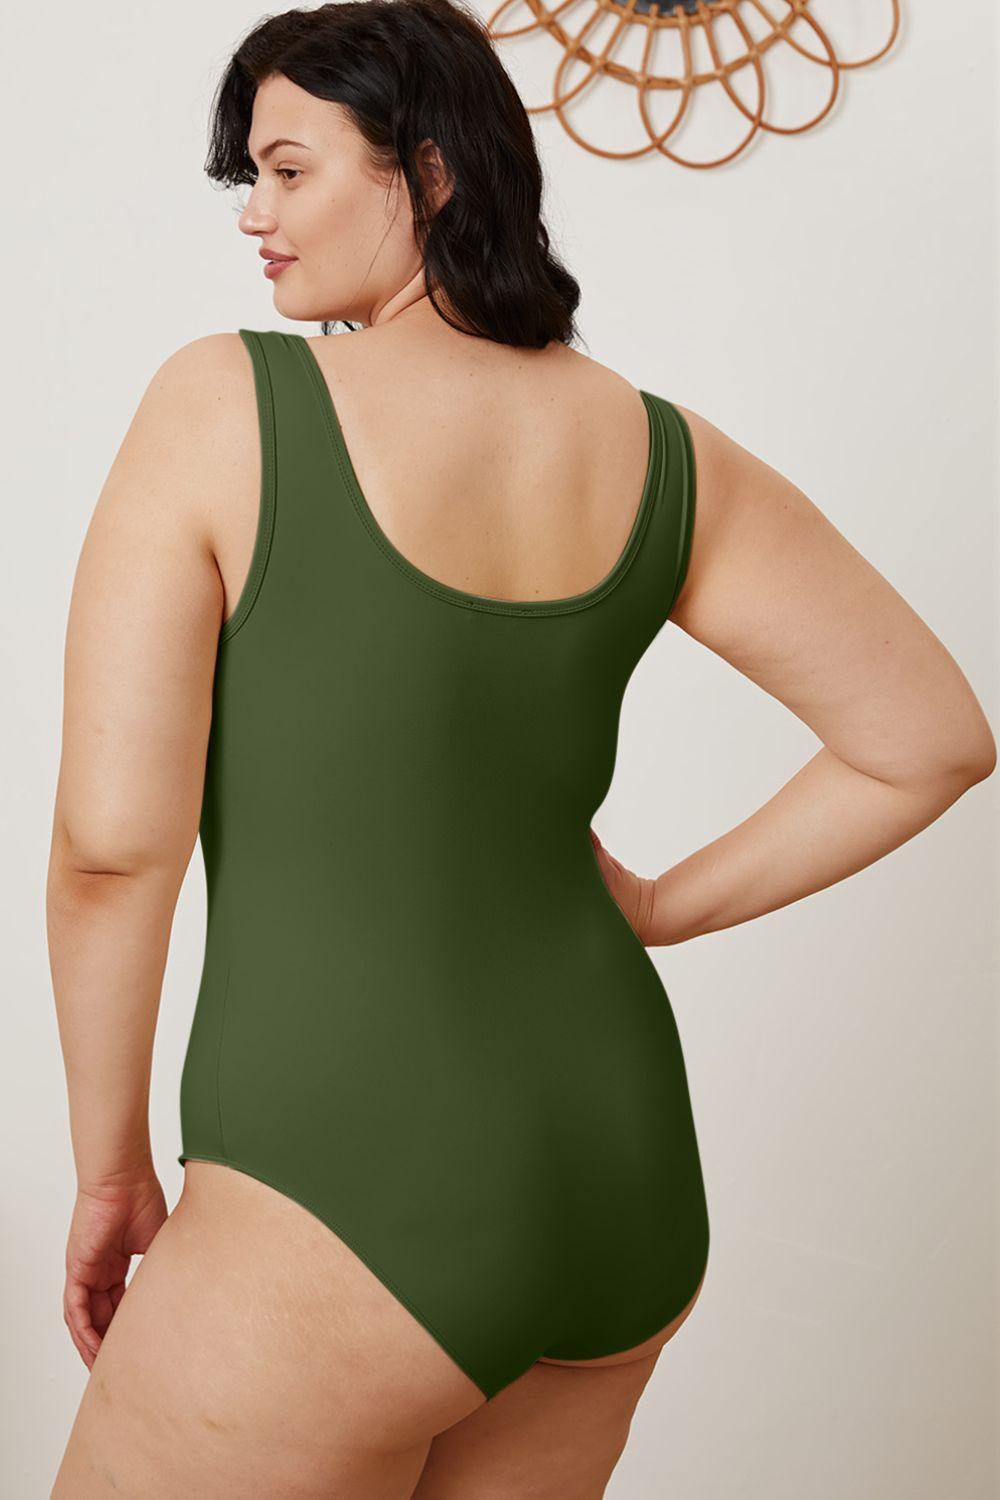 a woman in a green bodysuit with her hands on her hips